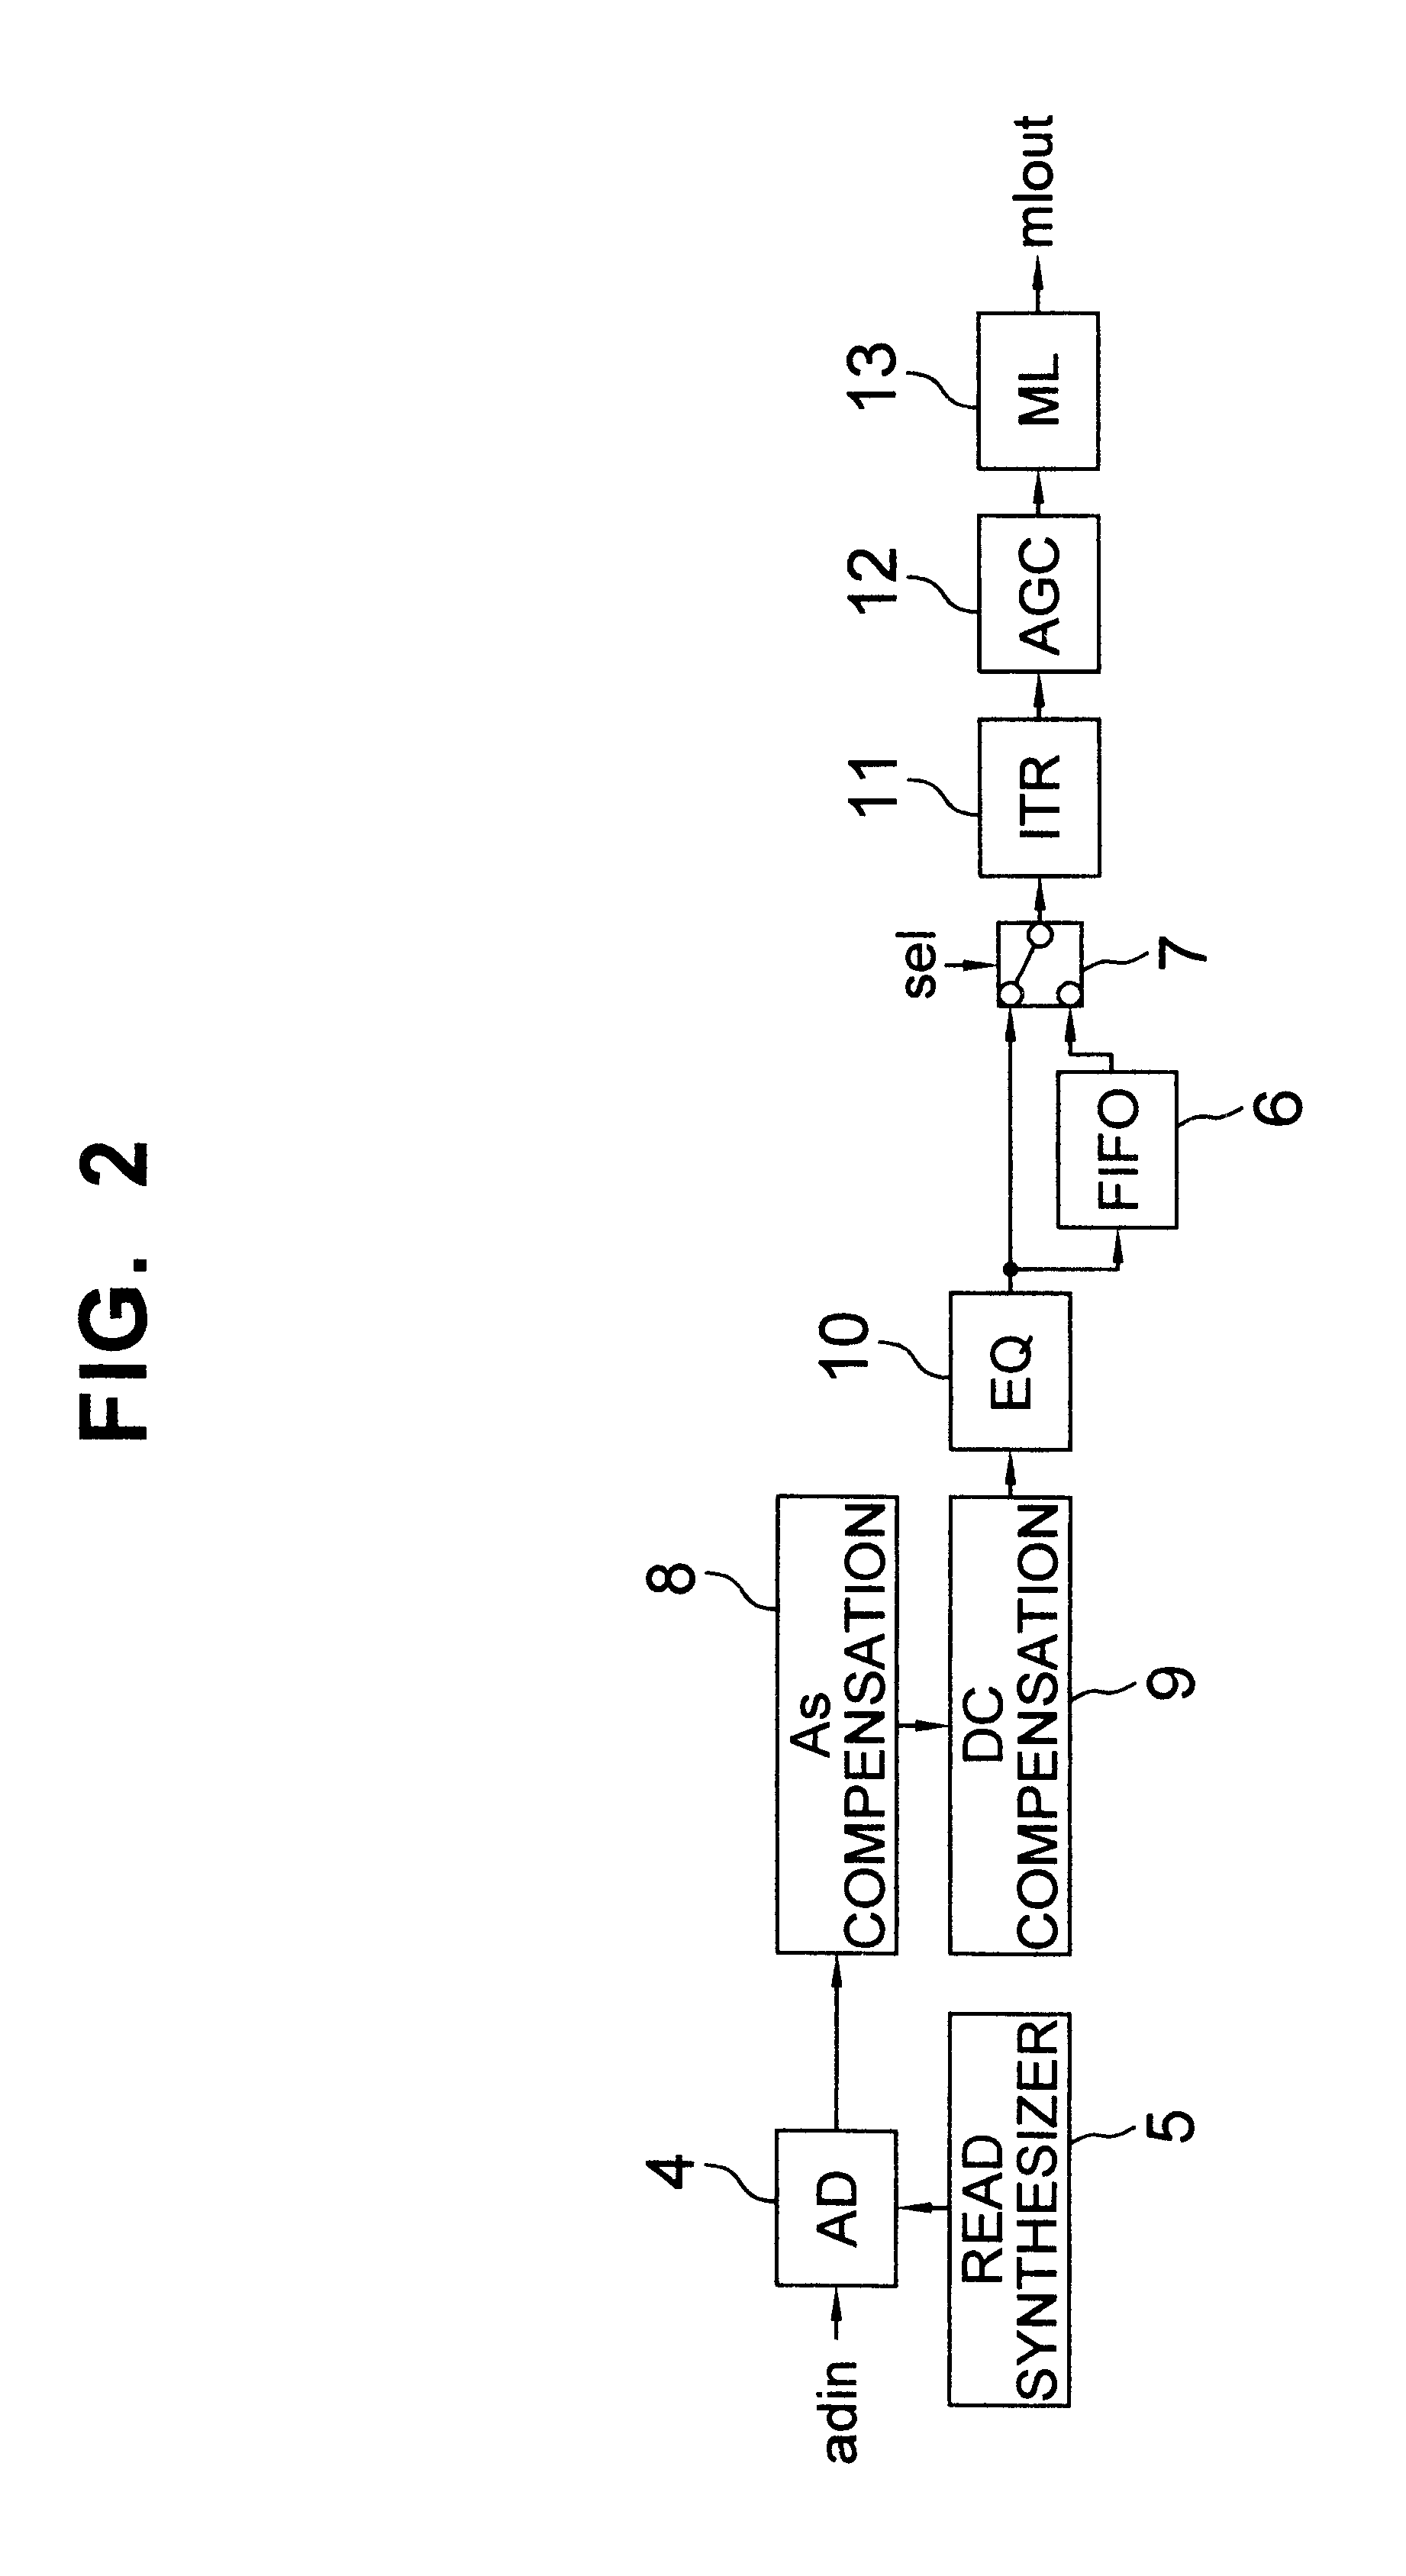 Signal processing apparatus and a data recording and reproducing apparatus including local memory processor